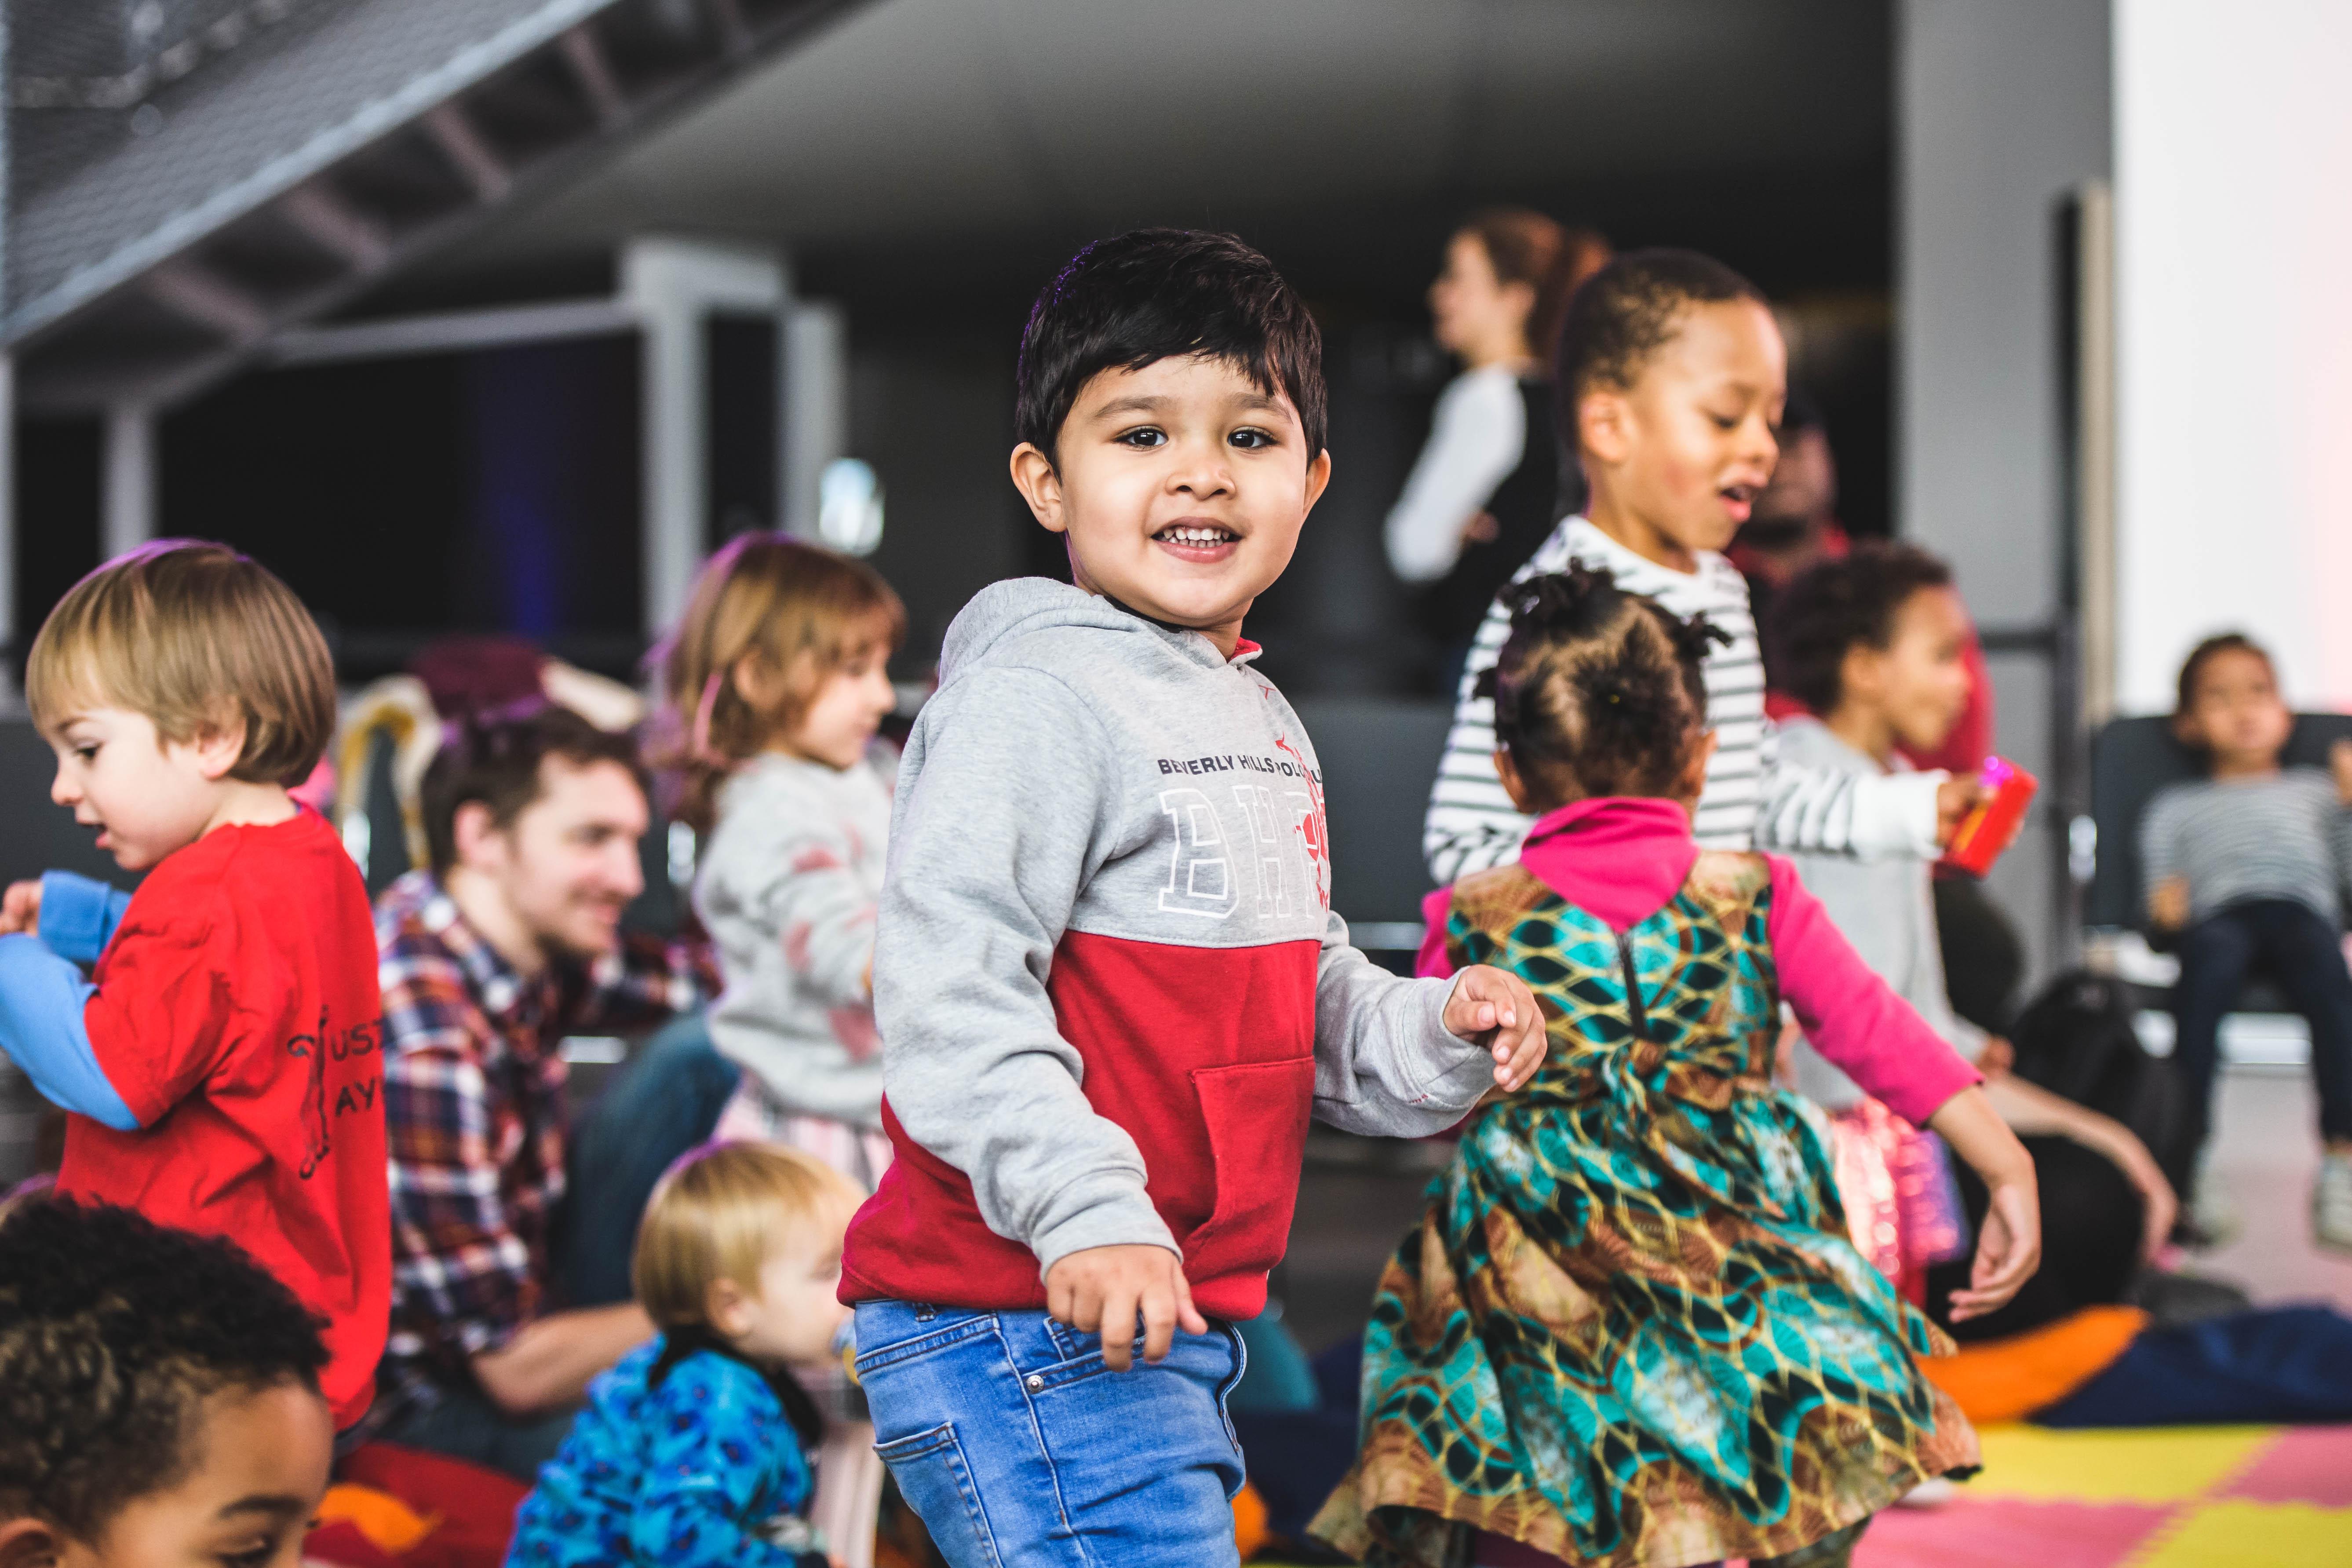 A group of toddlers at the London Jazz Festival